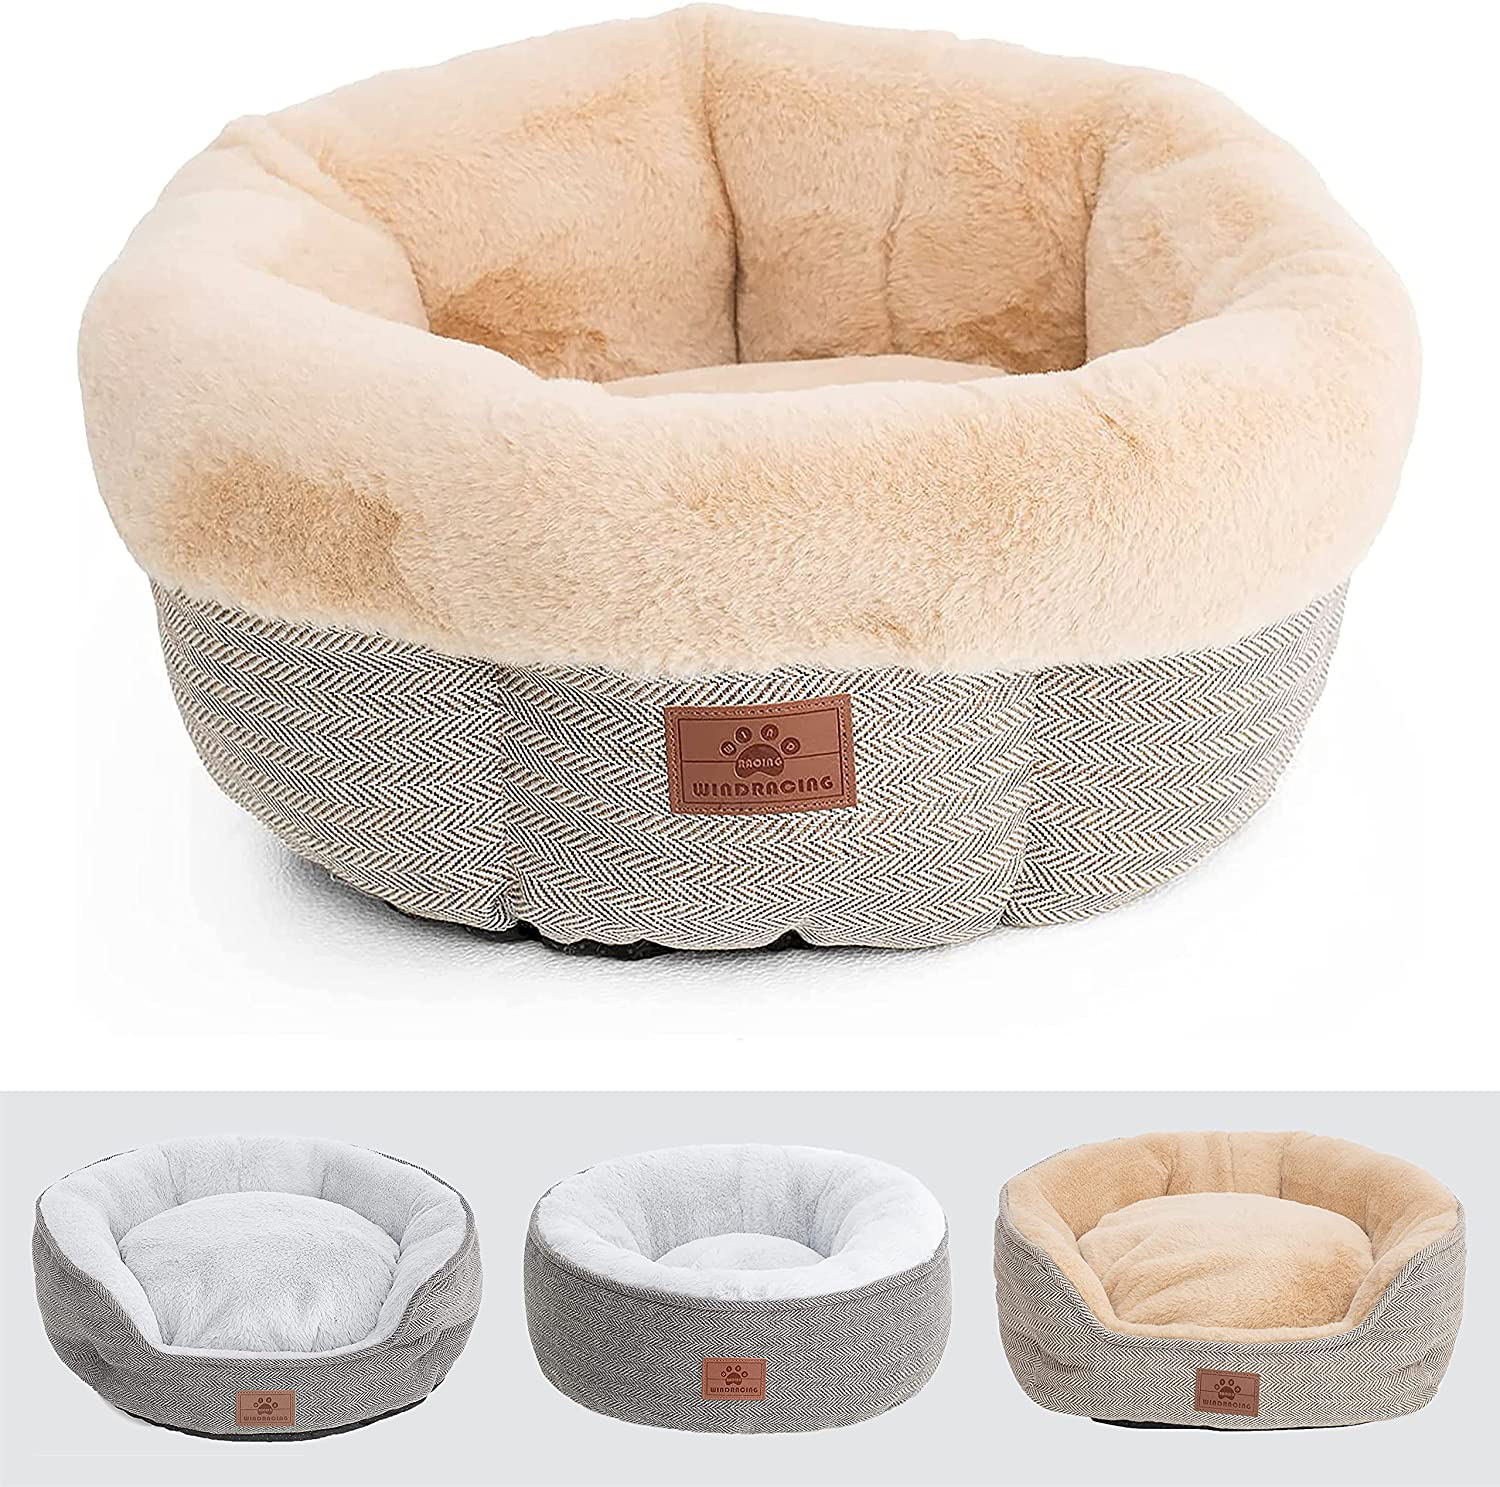 Cat Beds for Indoor Cats,Small Dog Bed,Cuddler Dog Beds,Calming Dog Bed Donut,Soft Anxiety Cozy Pet Beds,Puppy Bed for Small/Medium Dogs Washable round in Beige Color,Windracing PET Animals & Pet Supplies > Pet Supplies > Cat Supplies > Cat Furniture WINDRACING Beige - Crown Shape Cat Bed Small 